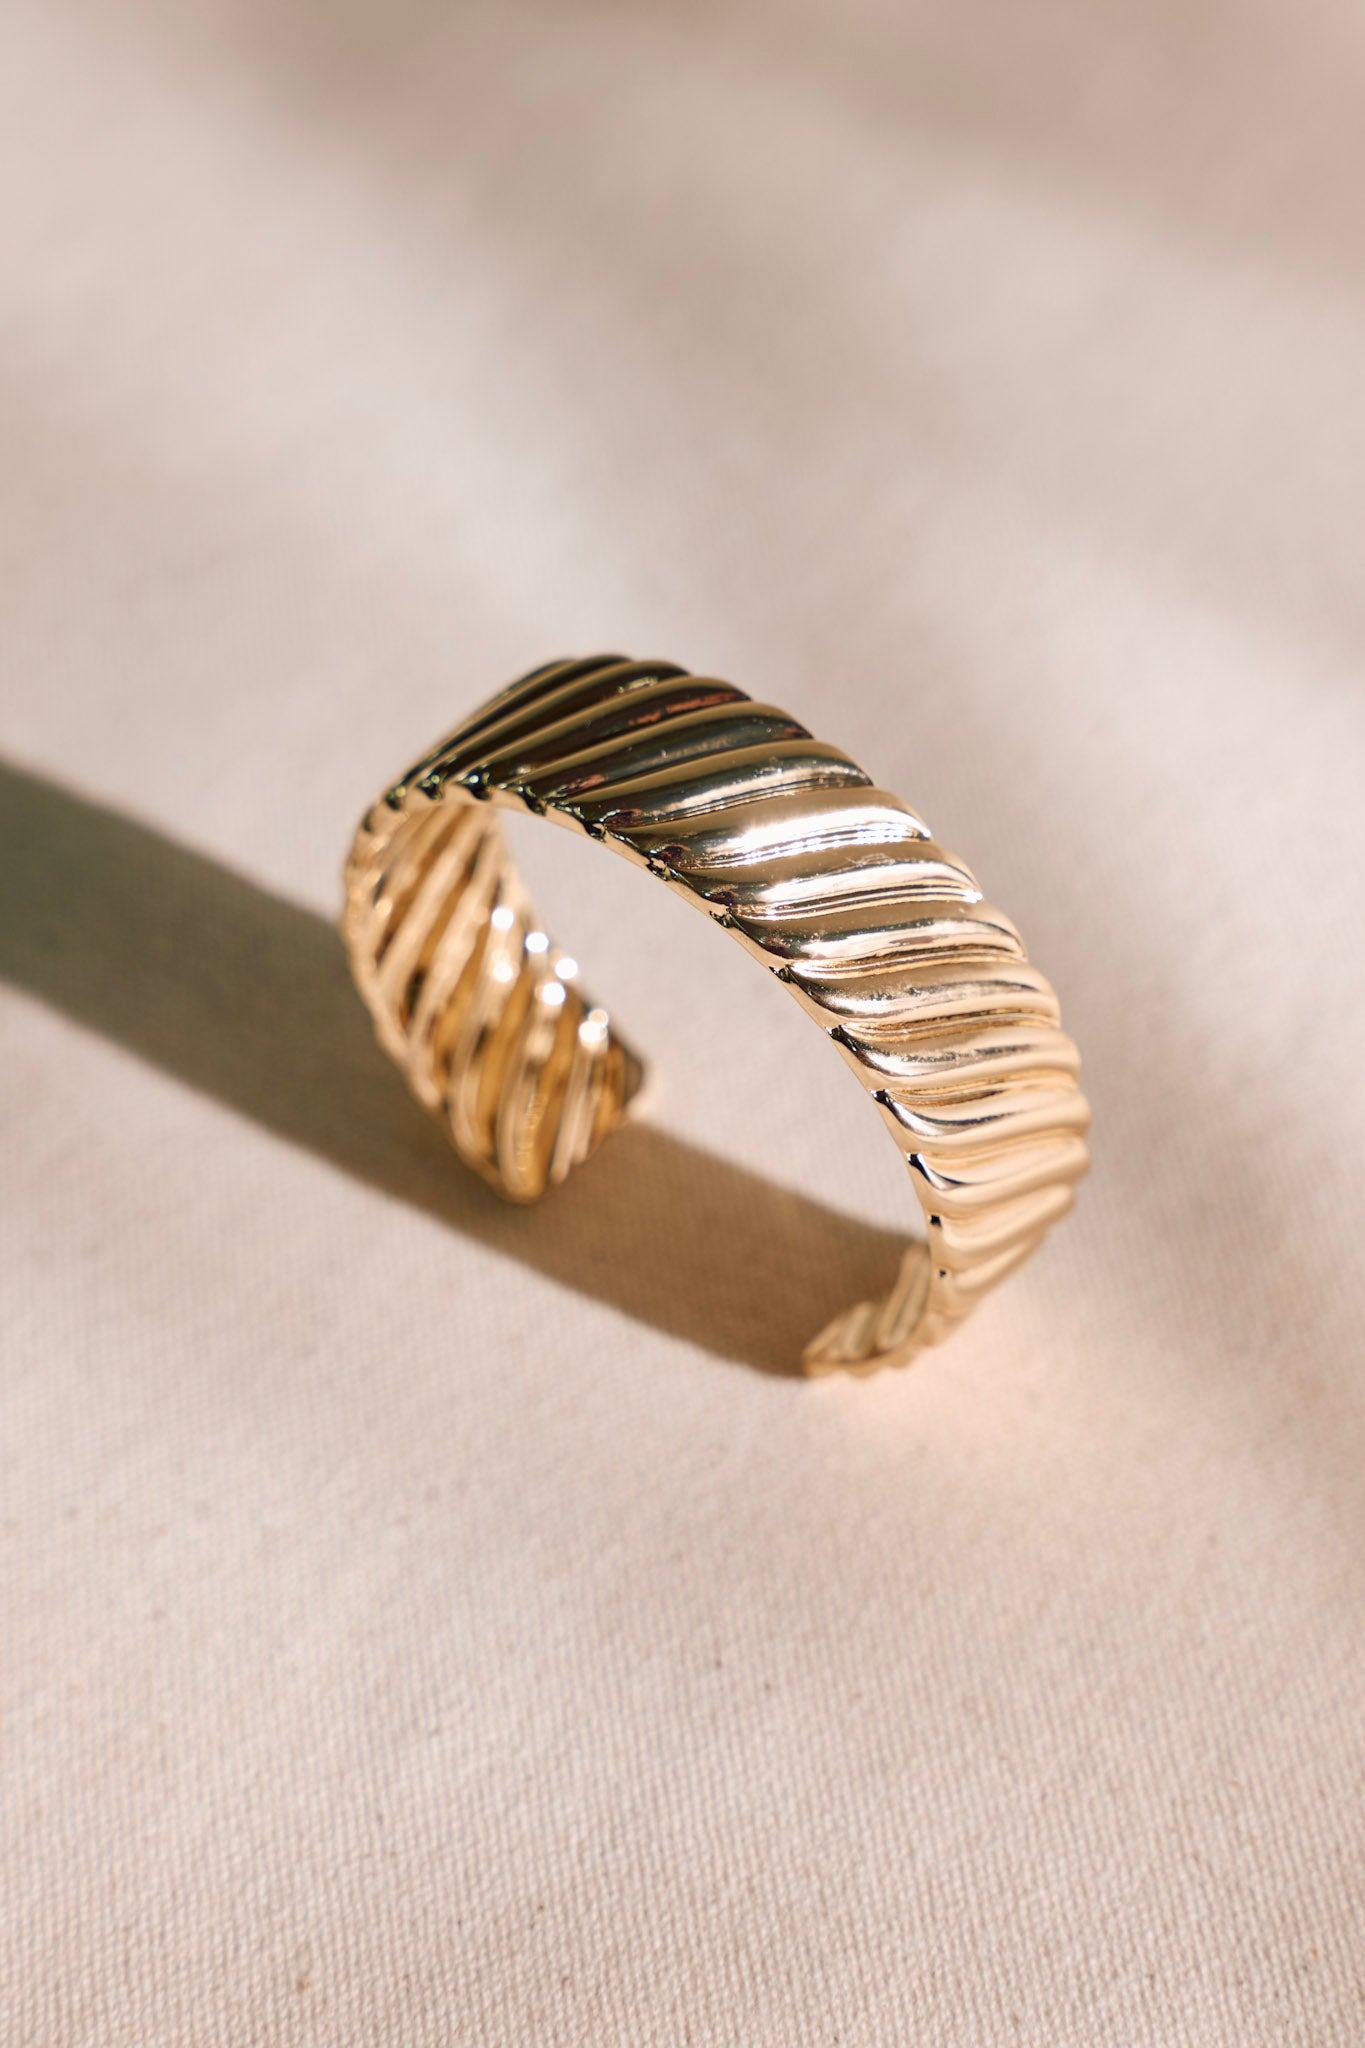 Twist and Shout Gold Textured Cuff